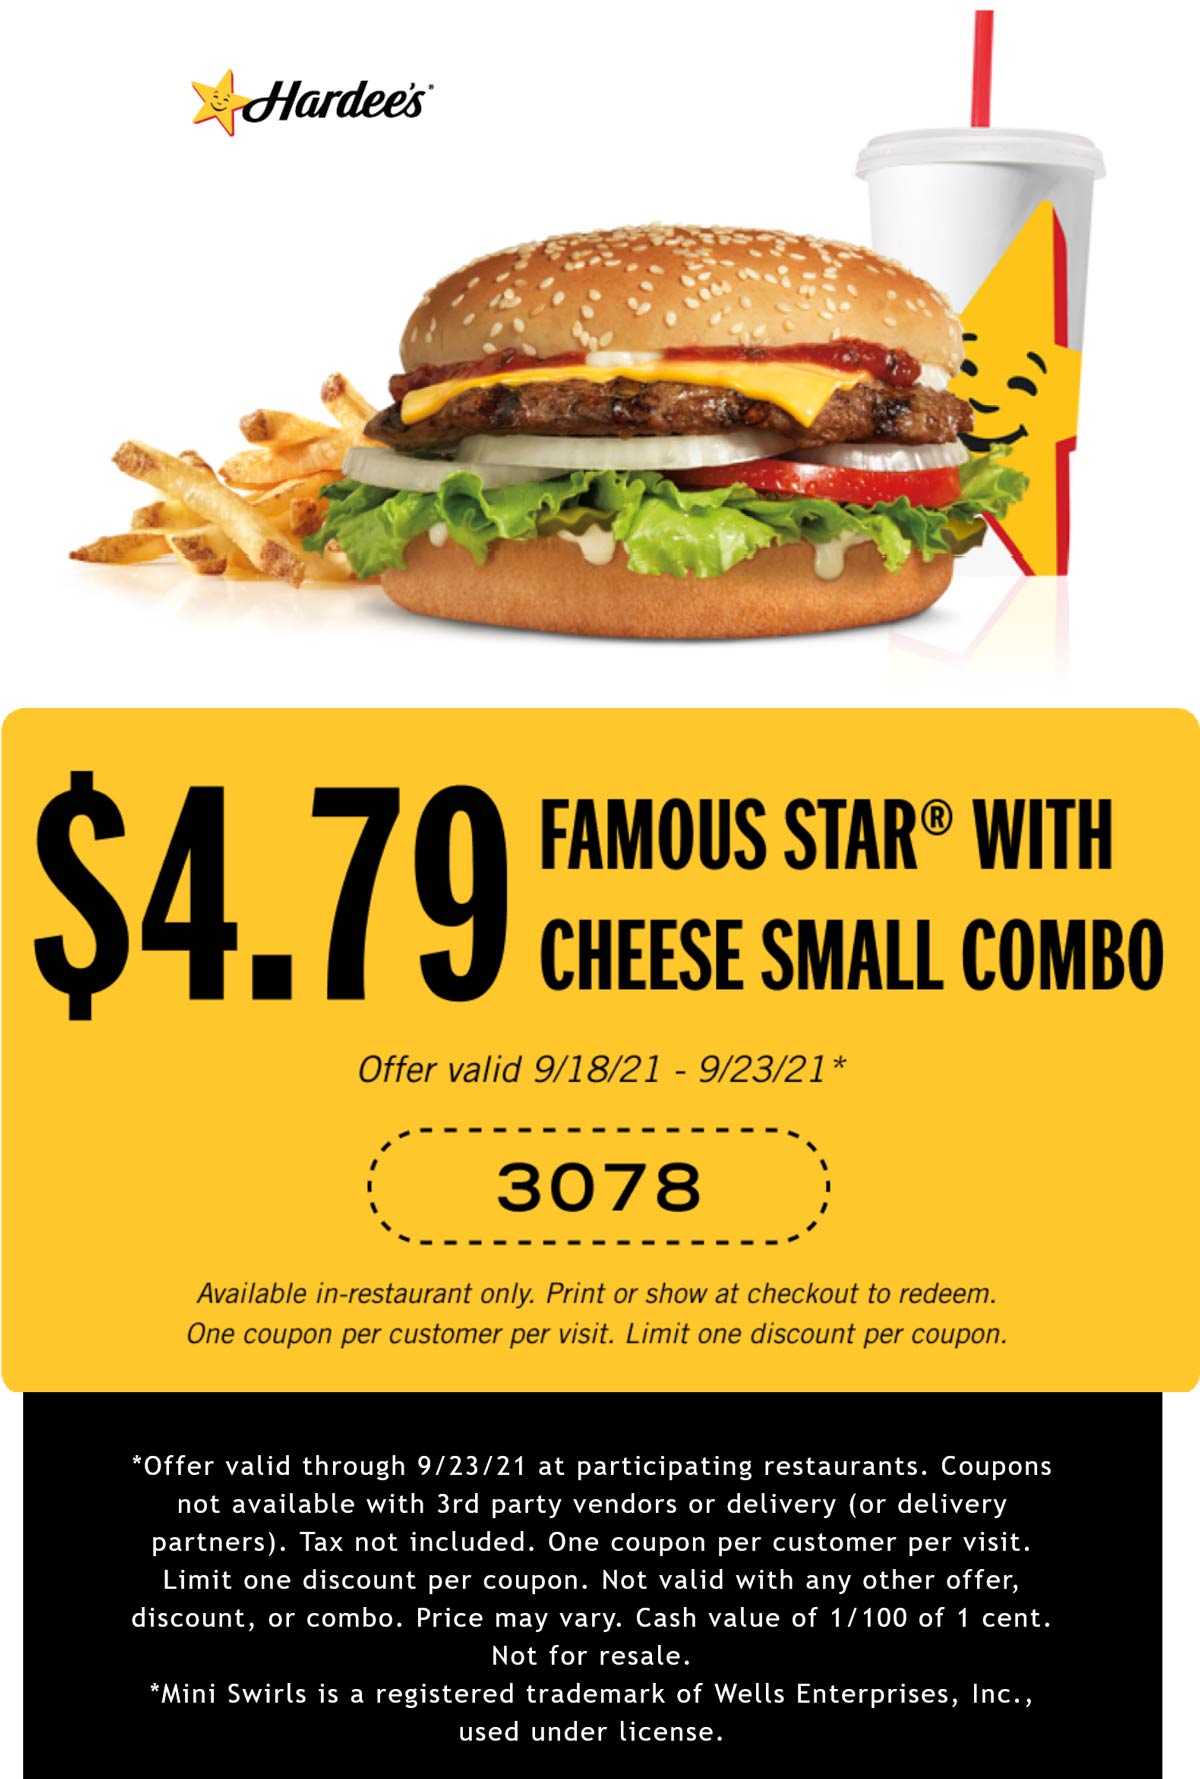 Hardees restaurants Coupon  Famous cheeseburger + fries + drink = $4.79 at Hardees #hardees 